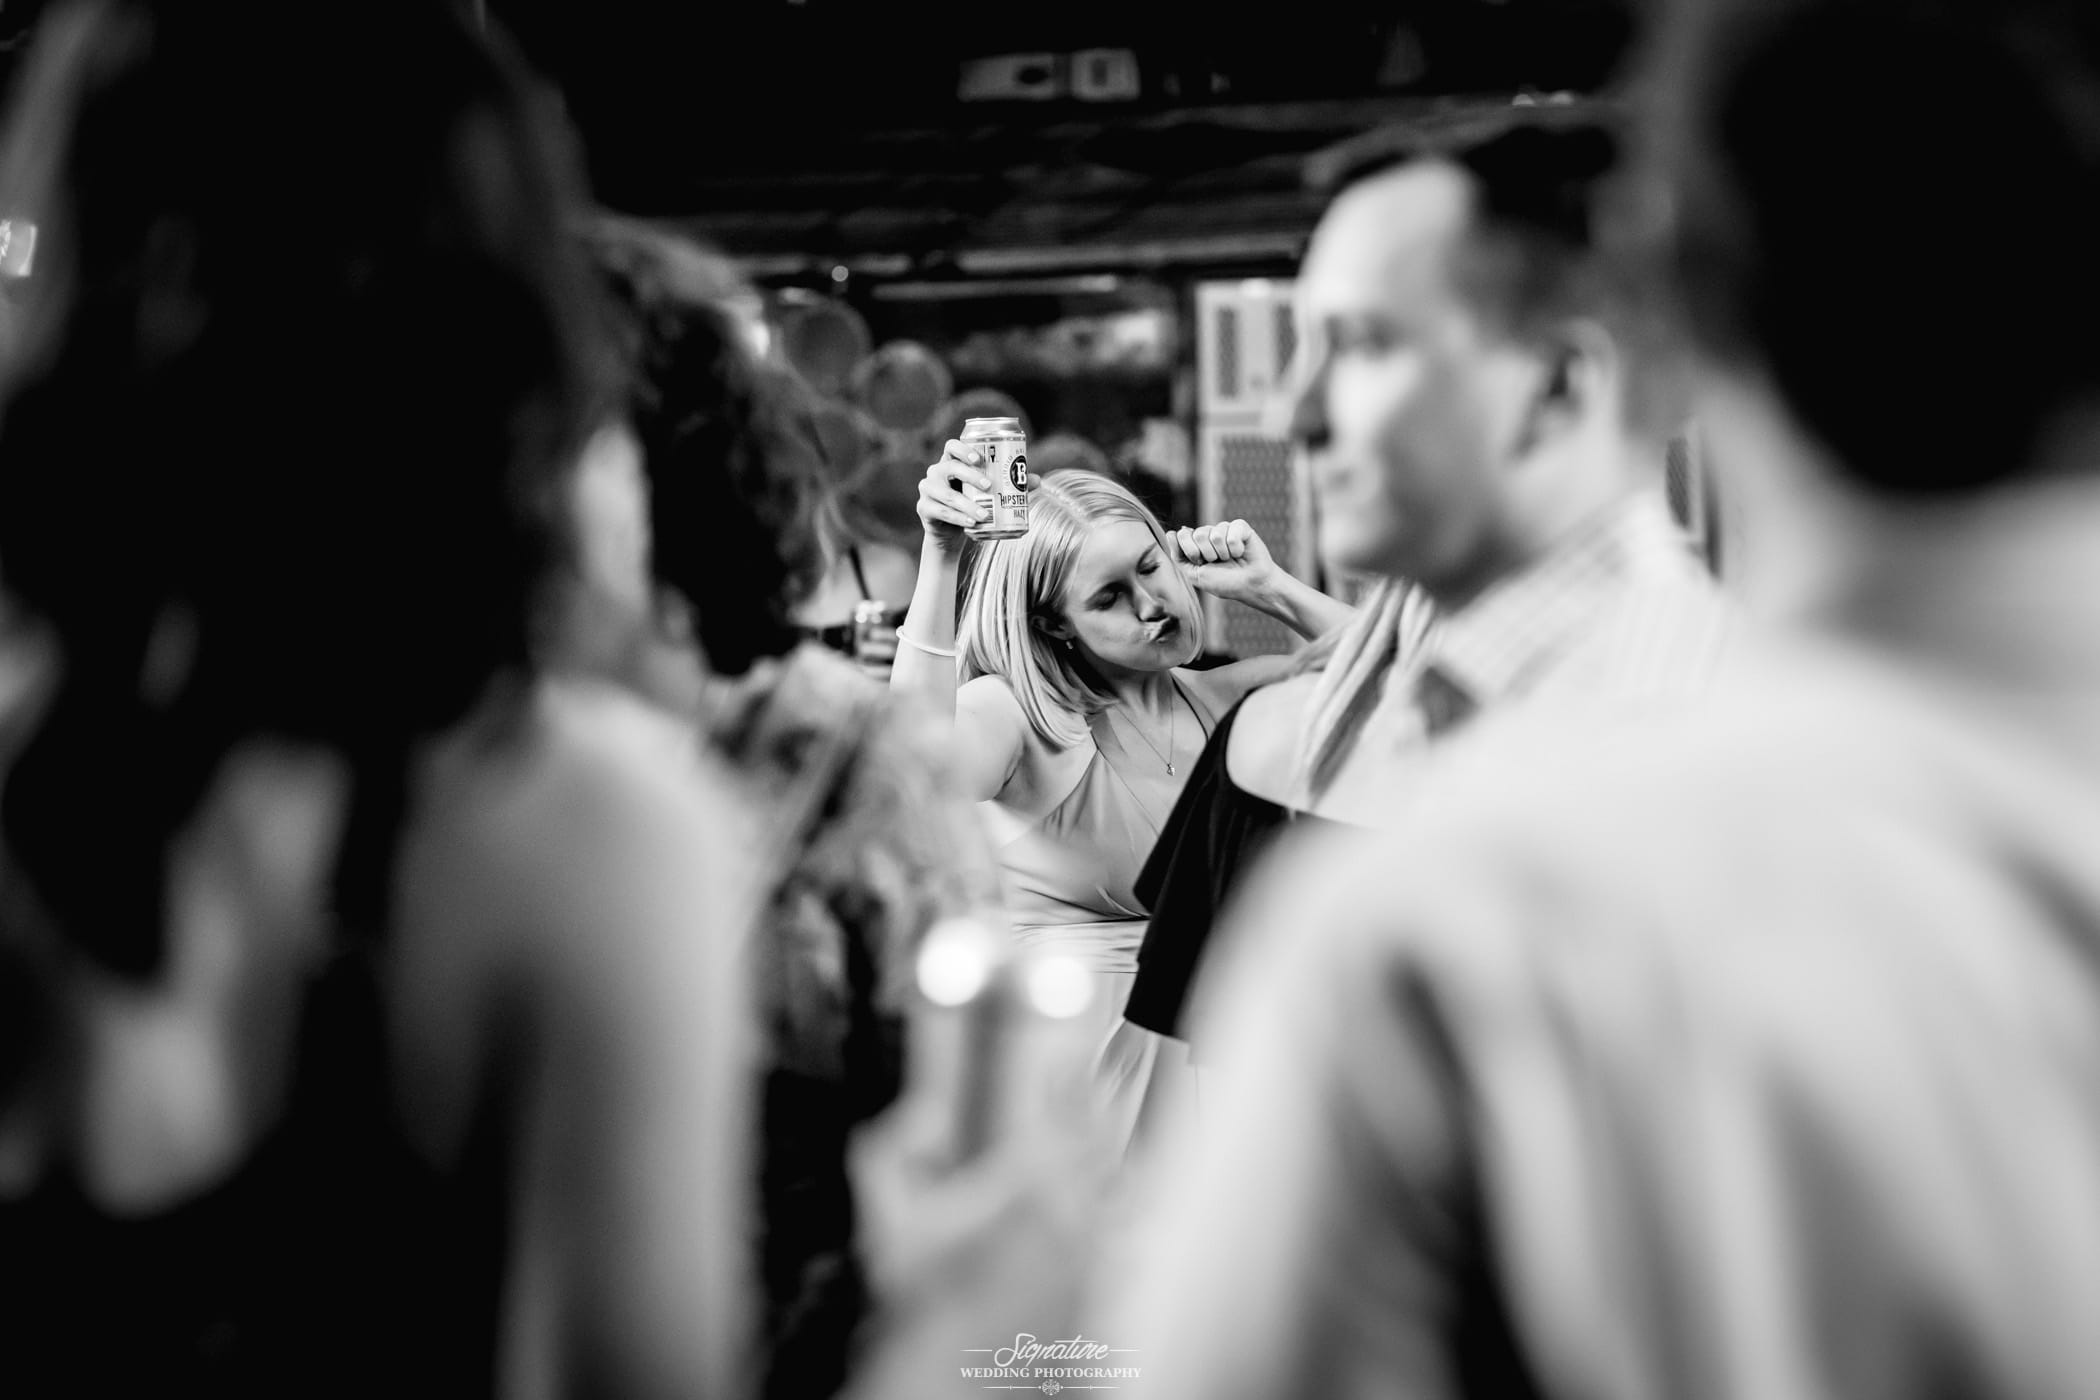 Wedding guest dancing candid black and white